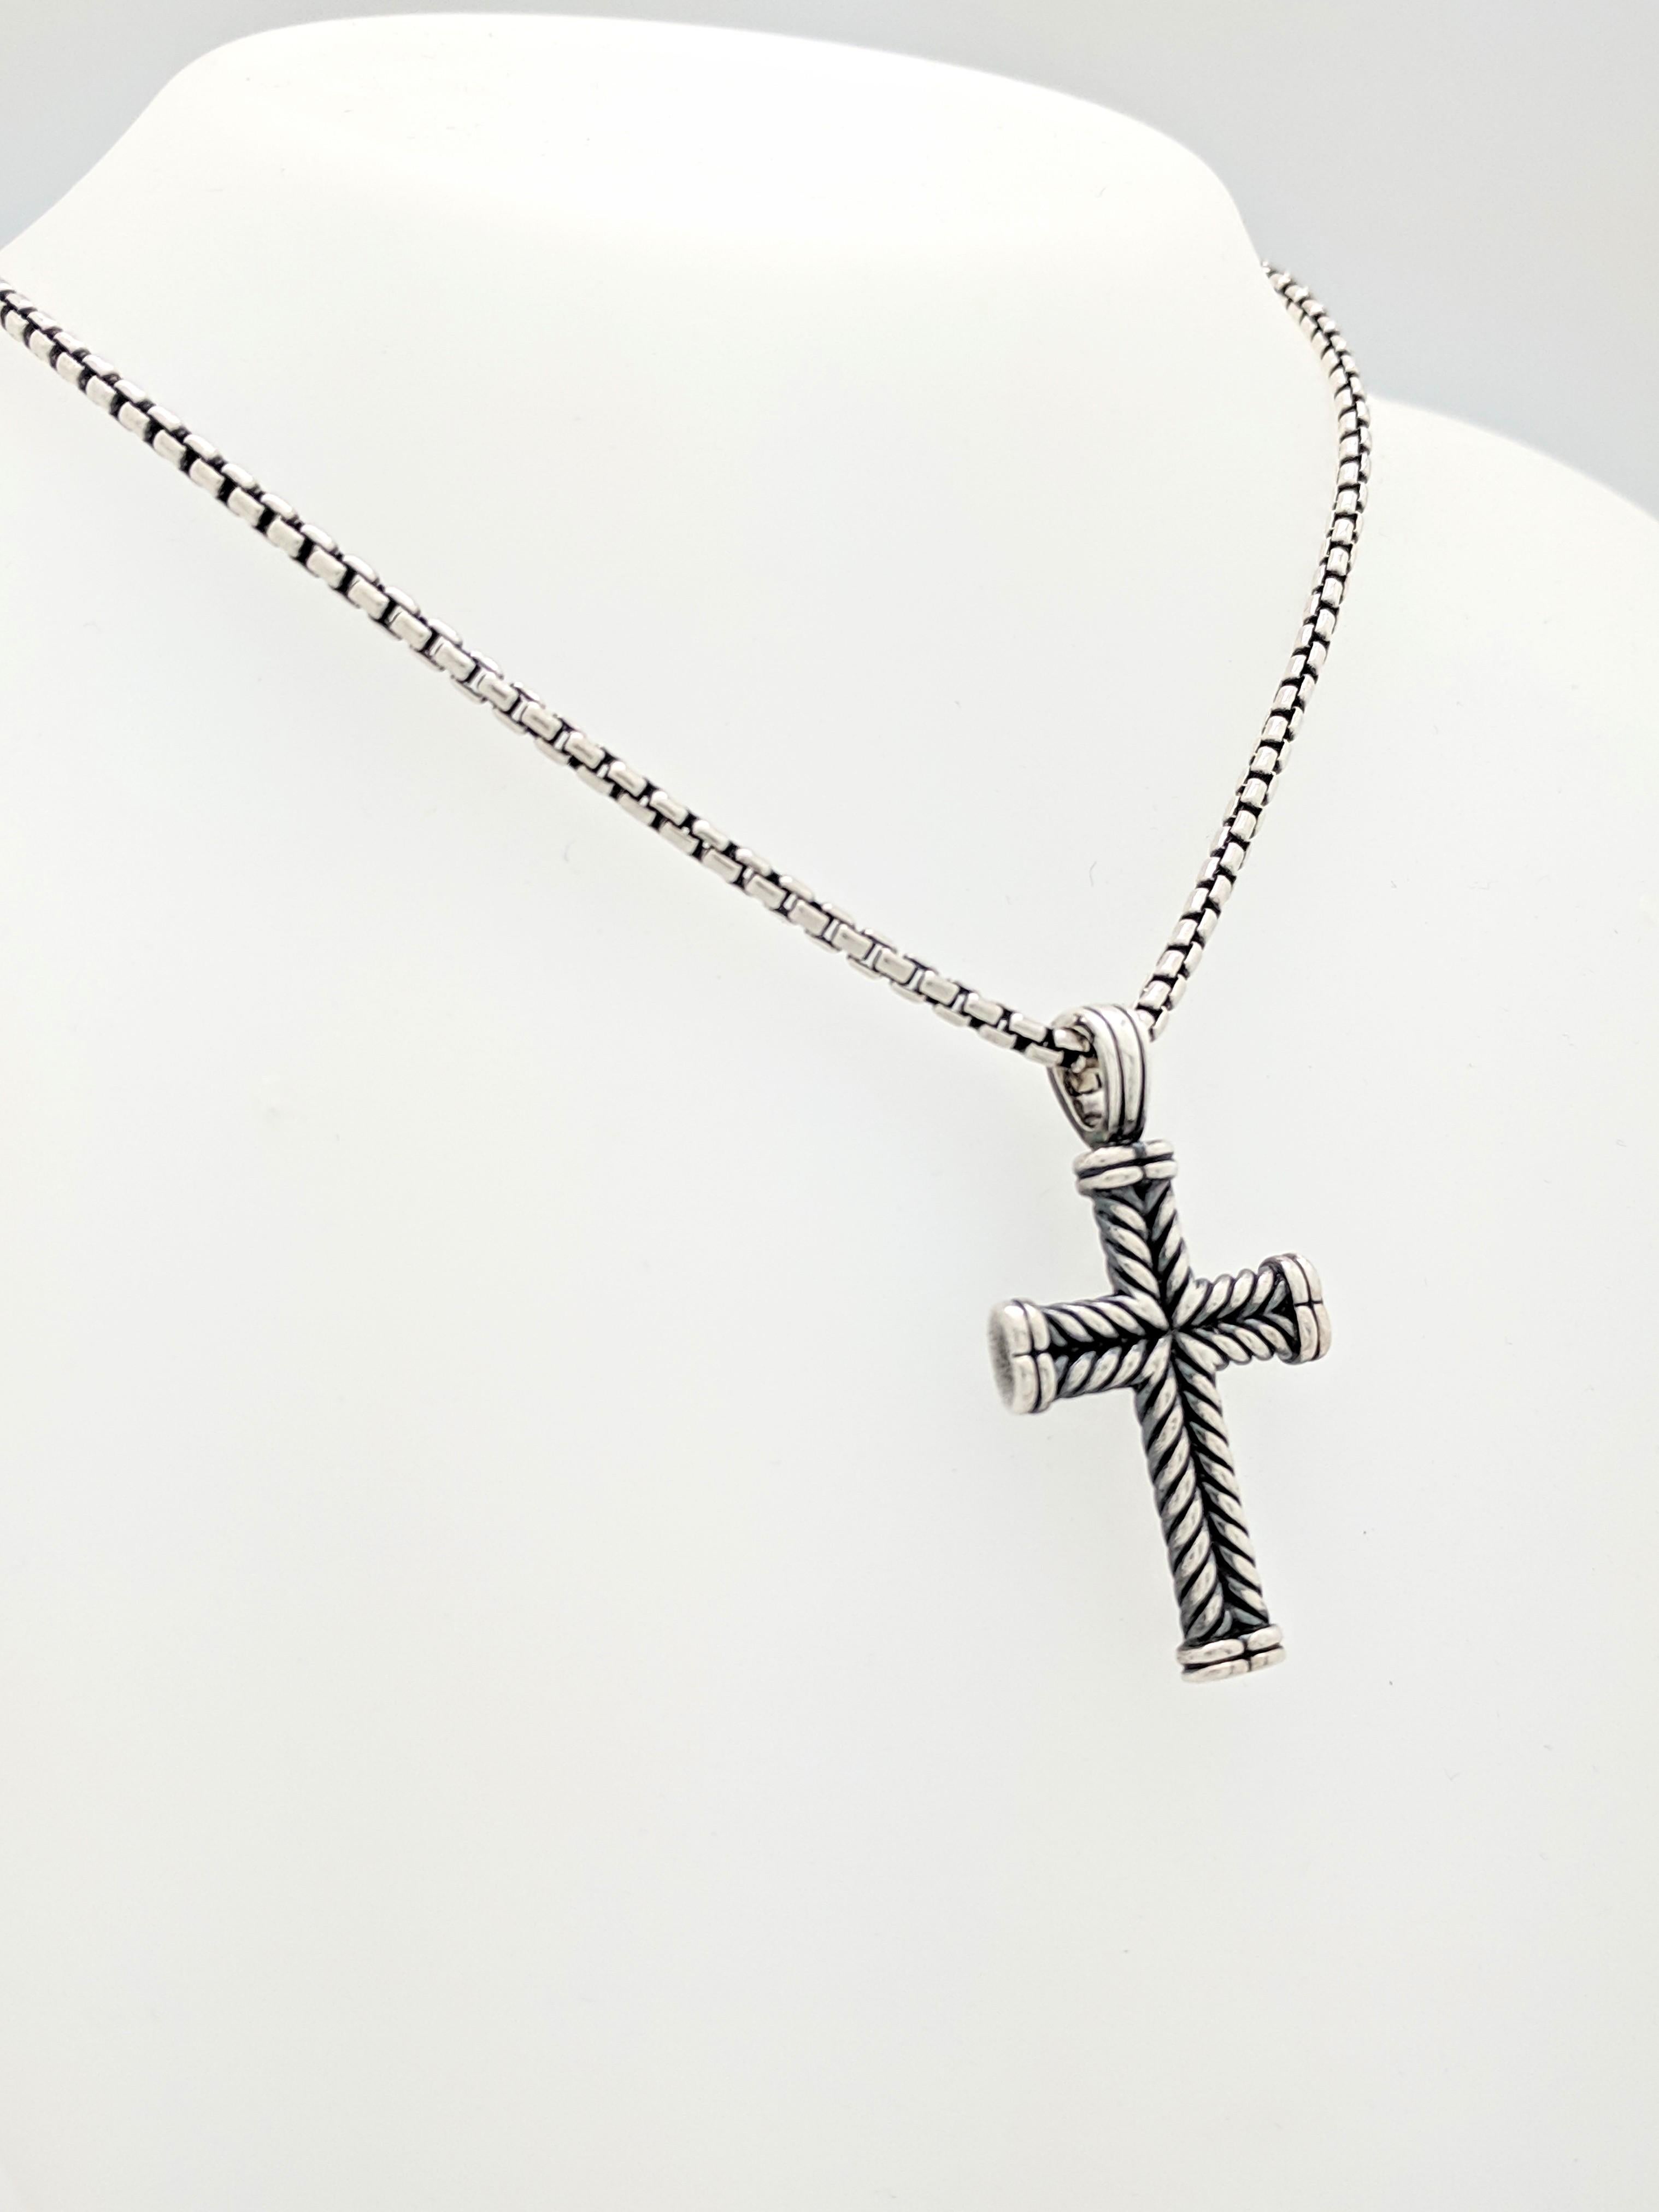 You are viewing an Authentic David Yurman Chevron Cross Pendant on a Small Box Chain Necklace.

    Sterling silver
    Pendant measures: 41 x 22.5mm (including bail)
    Necklace measures: 21.5